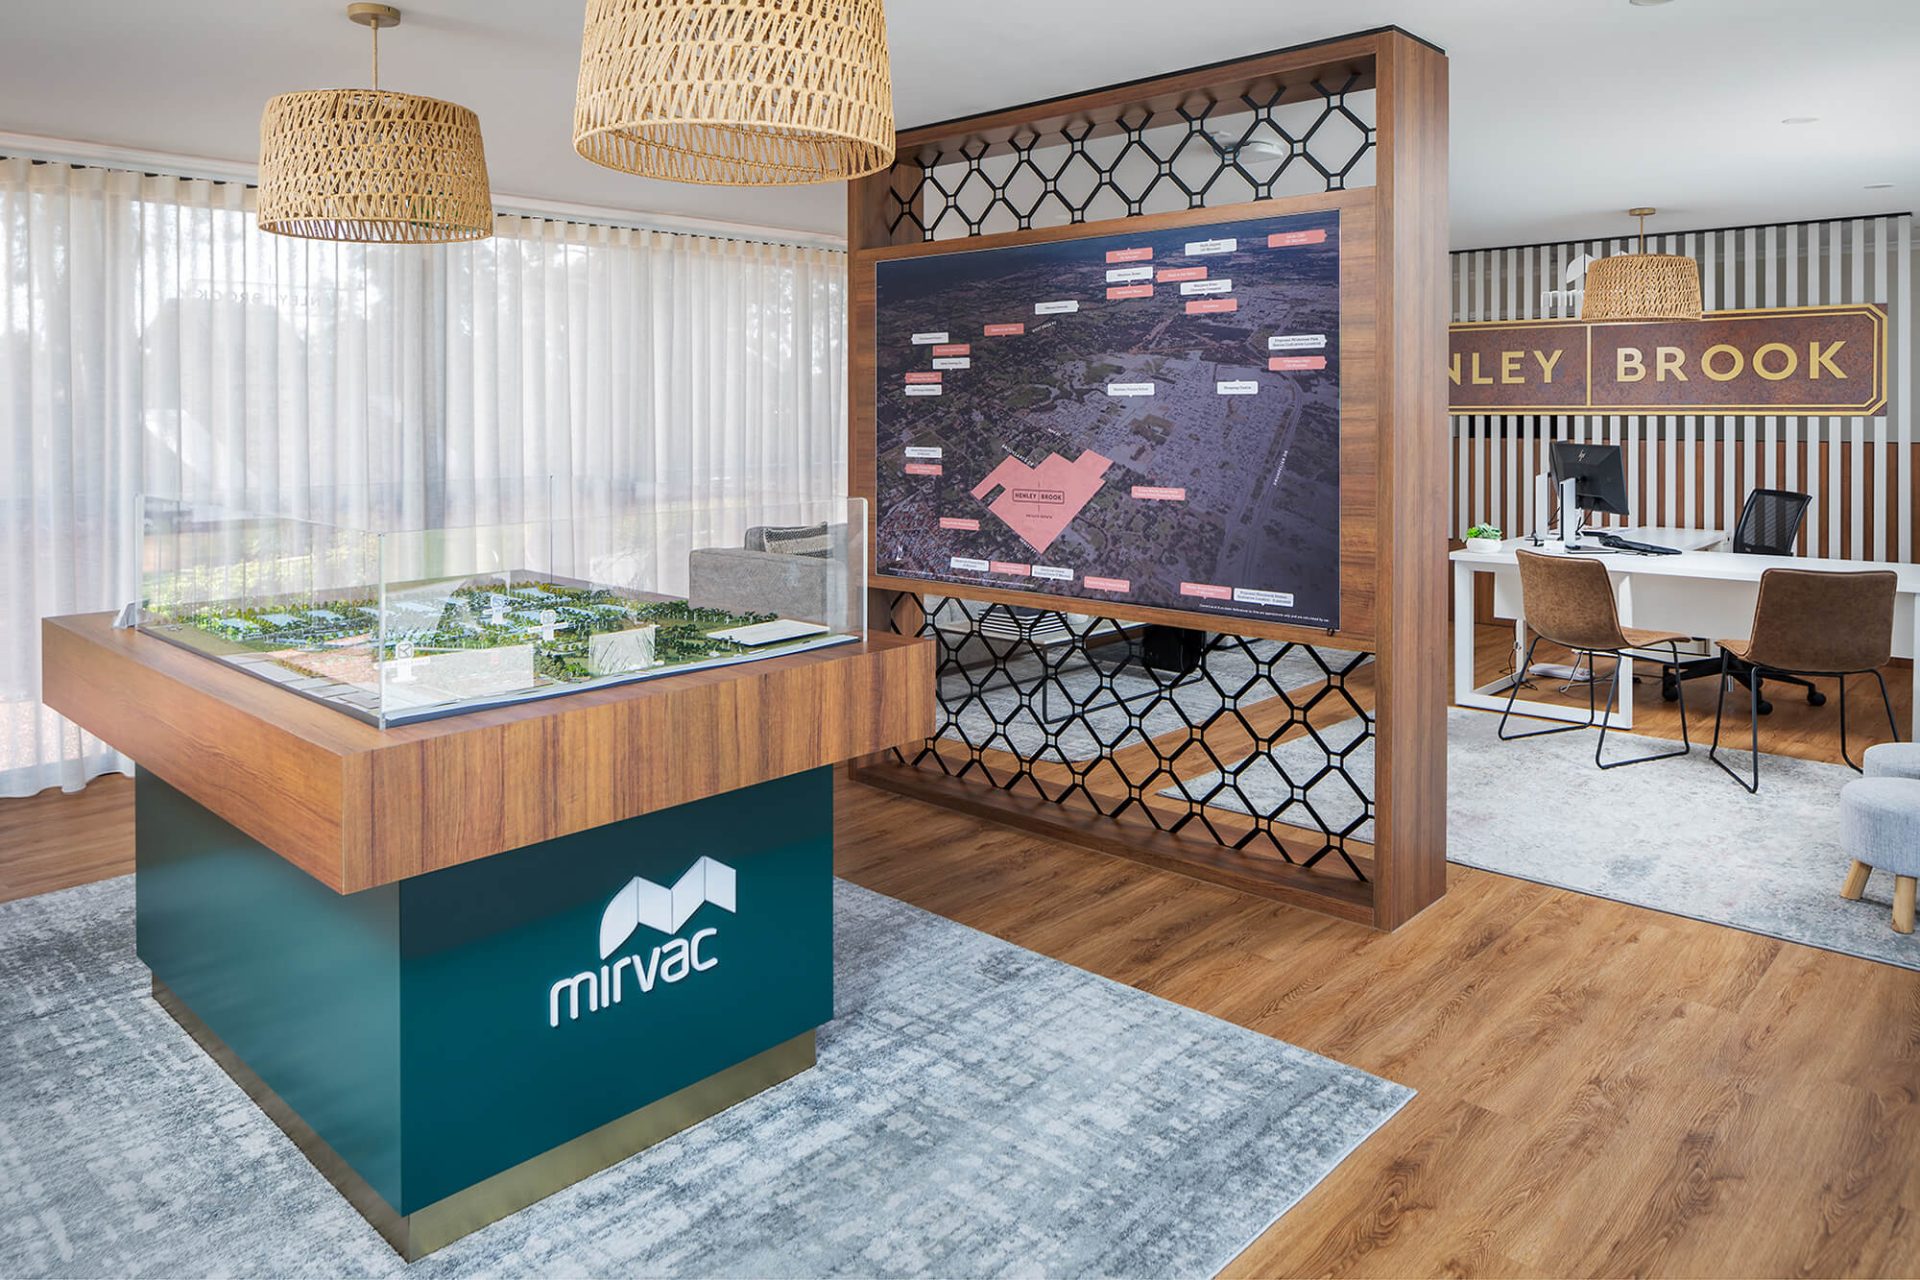 Henley Brook Sales Office for Mirvac